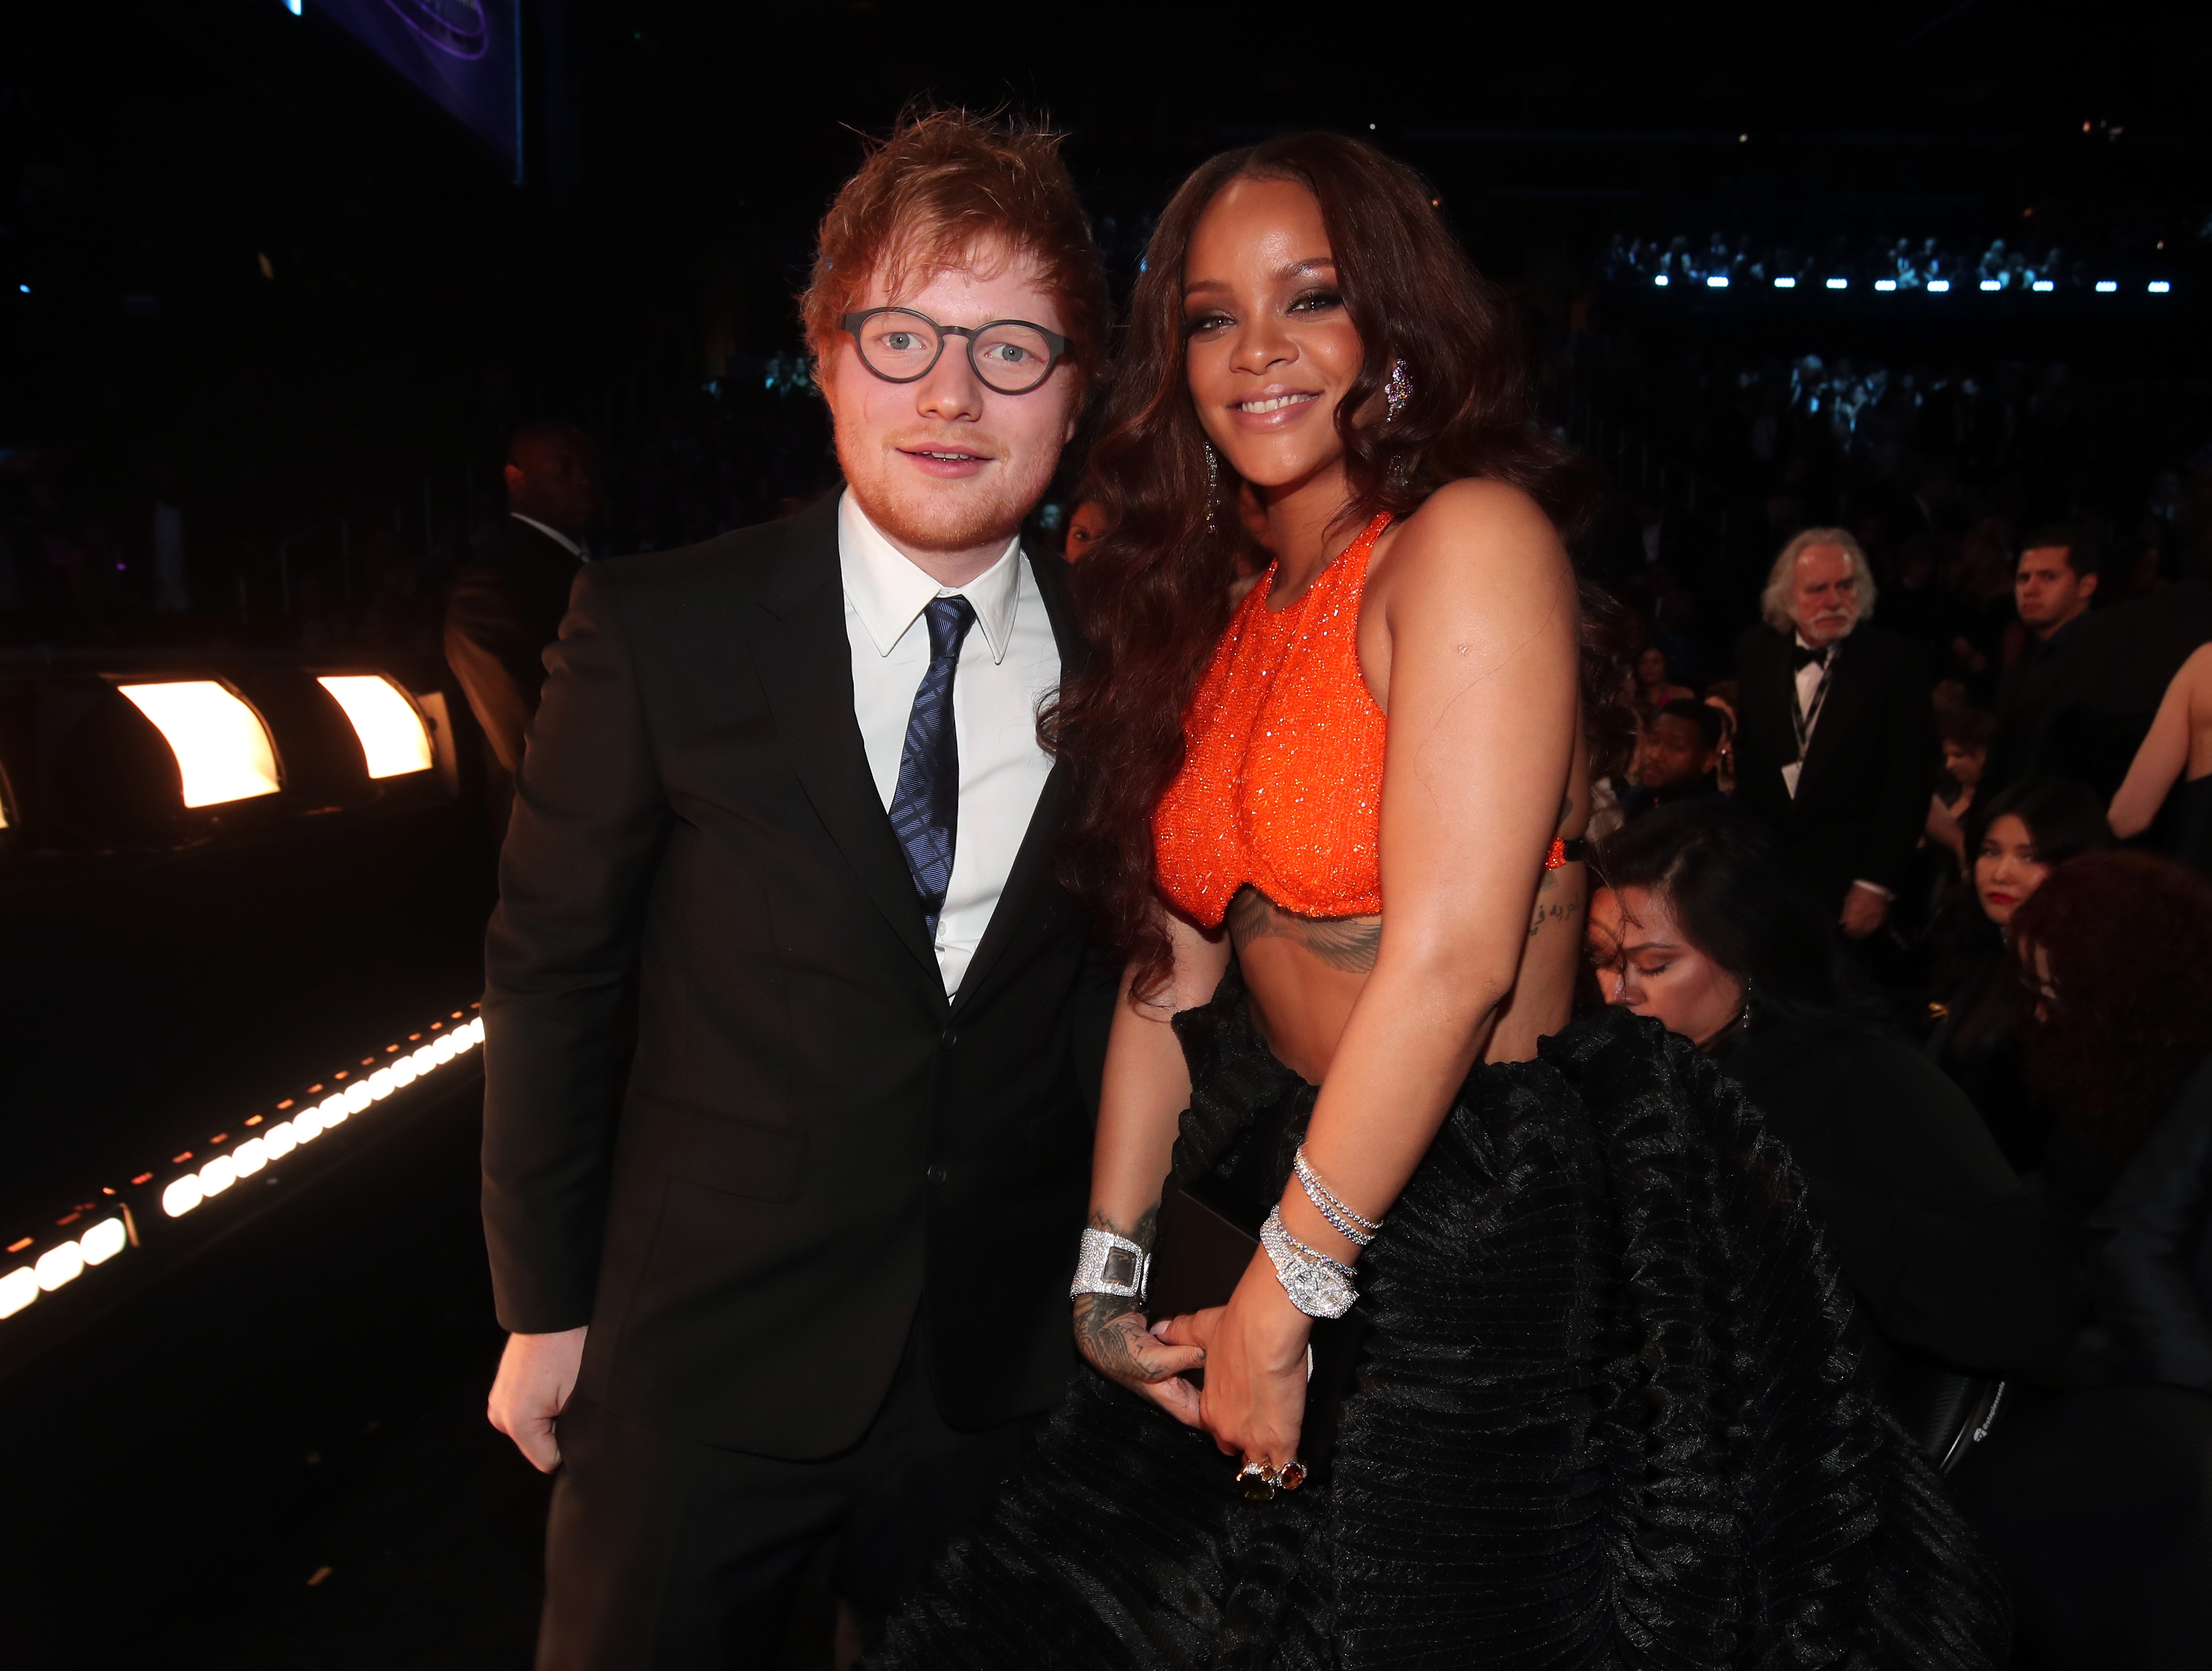 Why Ed Sheeran Decided Not to Give Rihanna ‘Shape of You’